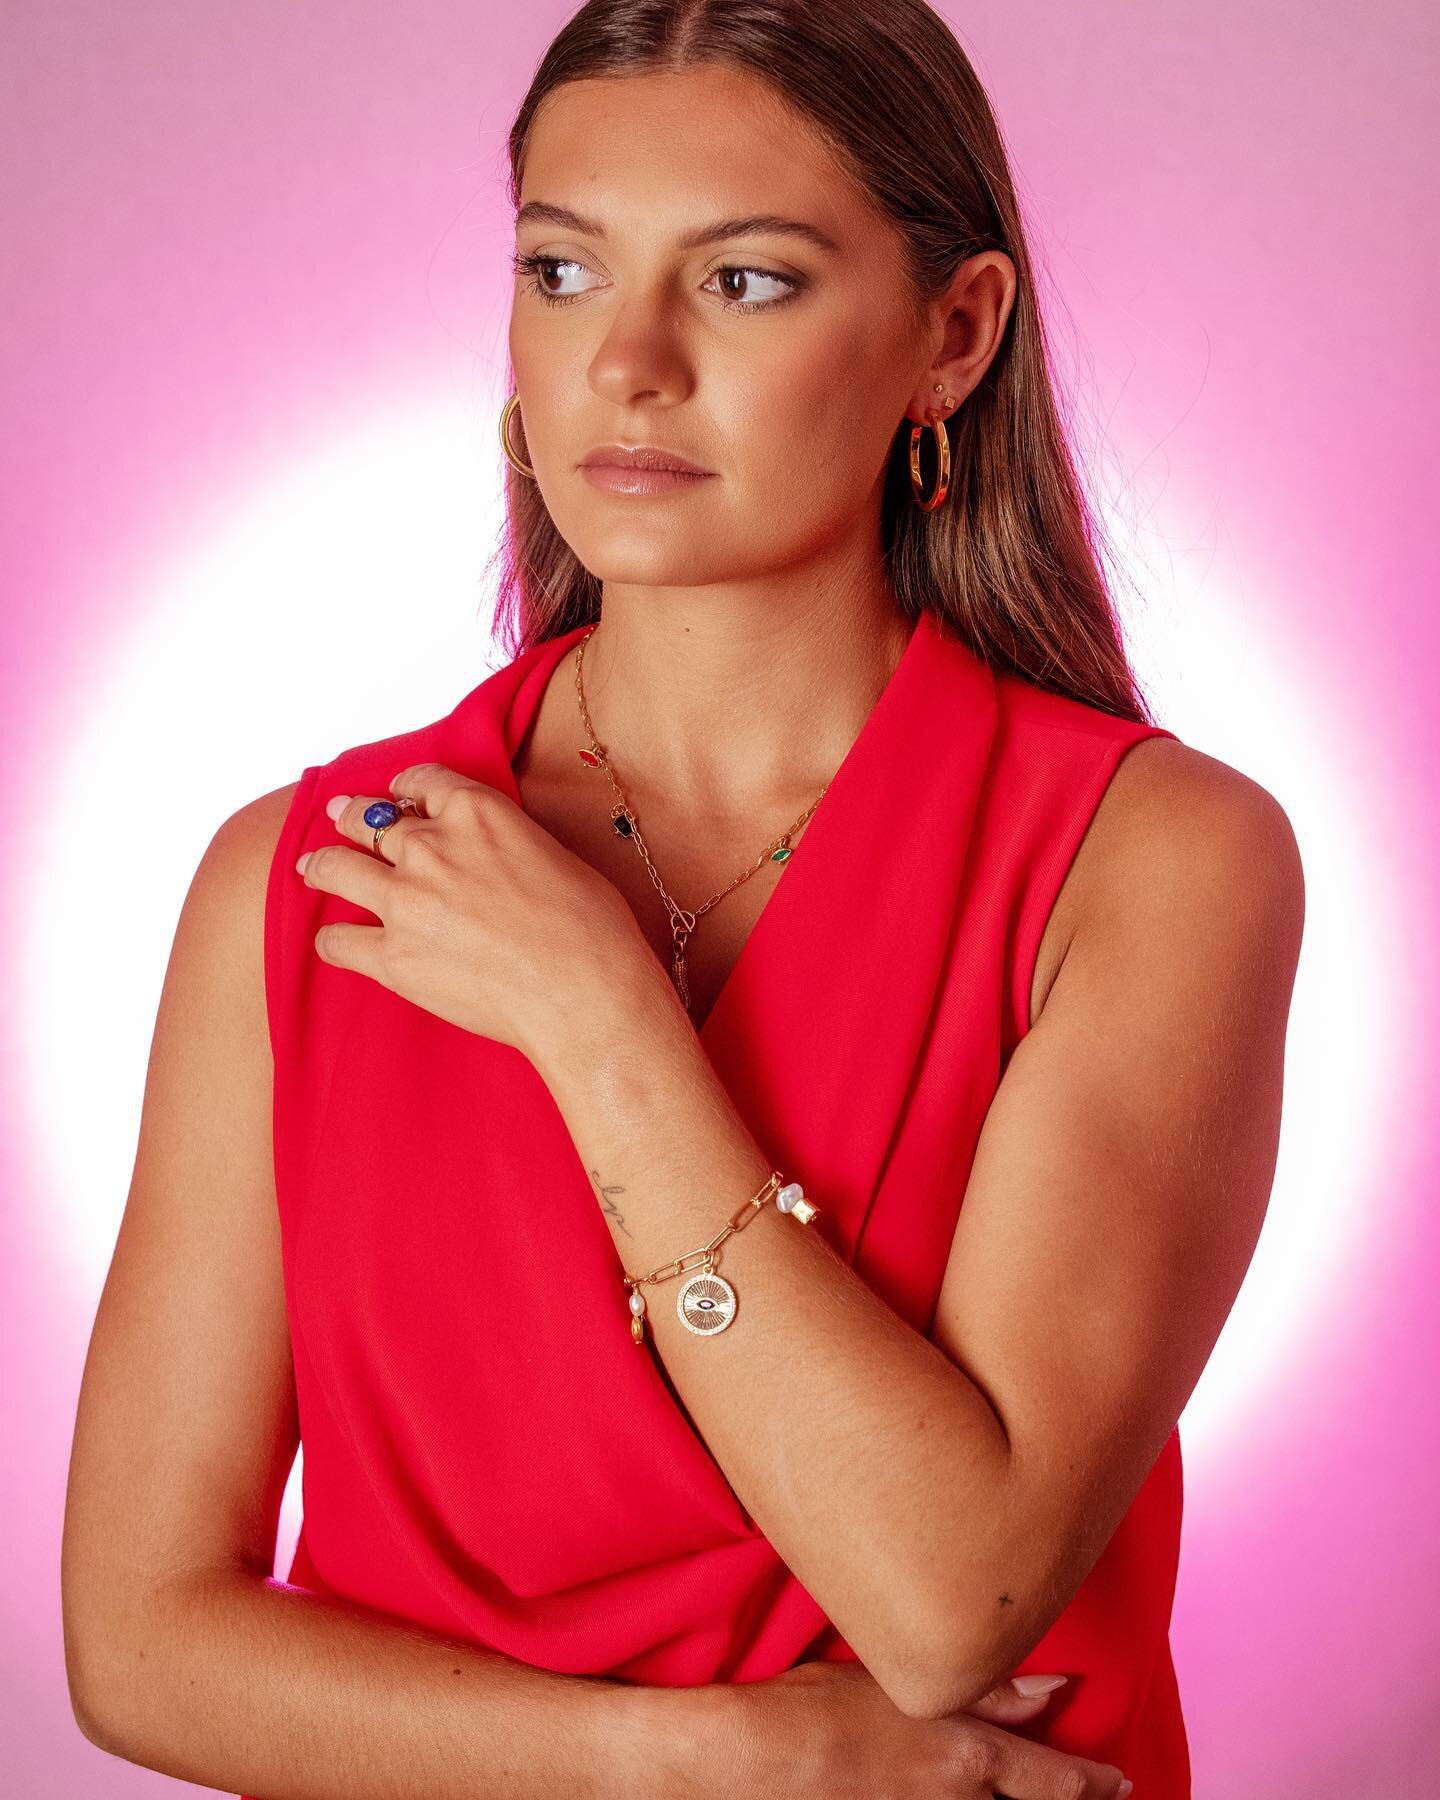 🛍️ Dress to impress this week&hellip;
Who loves a charm bracelet? I definitely do 💯
.
.
.
The Tamsin bracelet is a beautiful gold charm bracelet featuring pearls, gold features and a fabulous central disc
#charm #bracelet #love #pearls #jewellery #